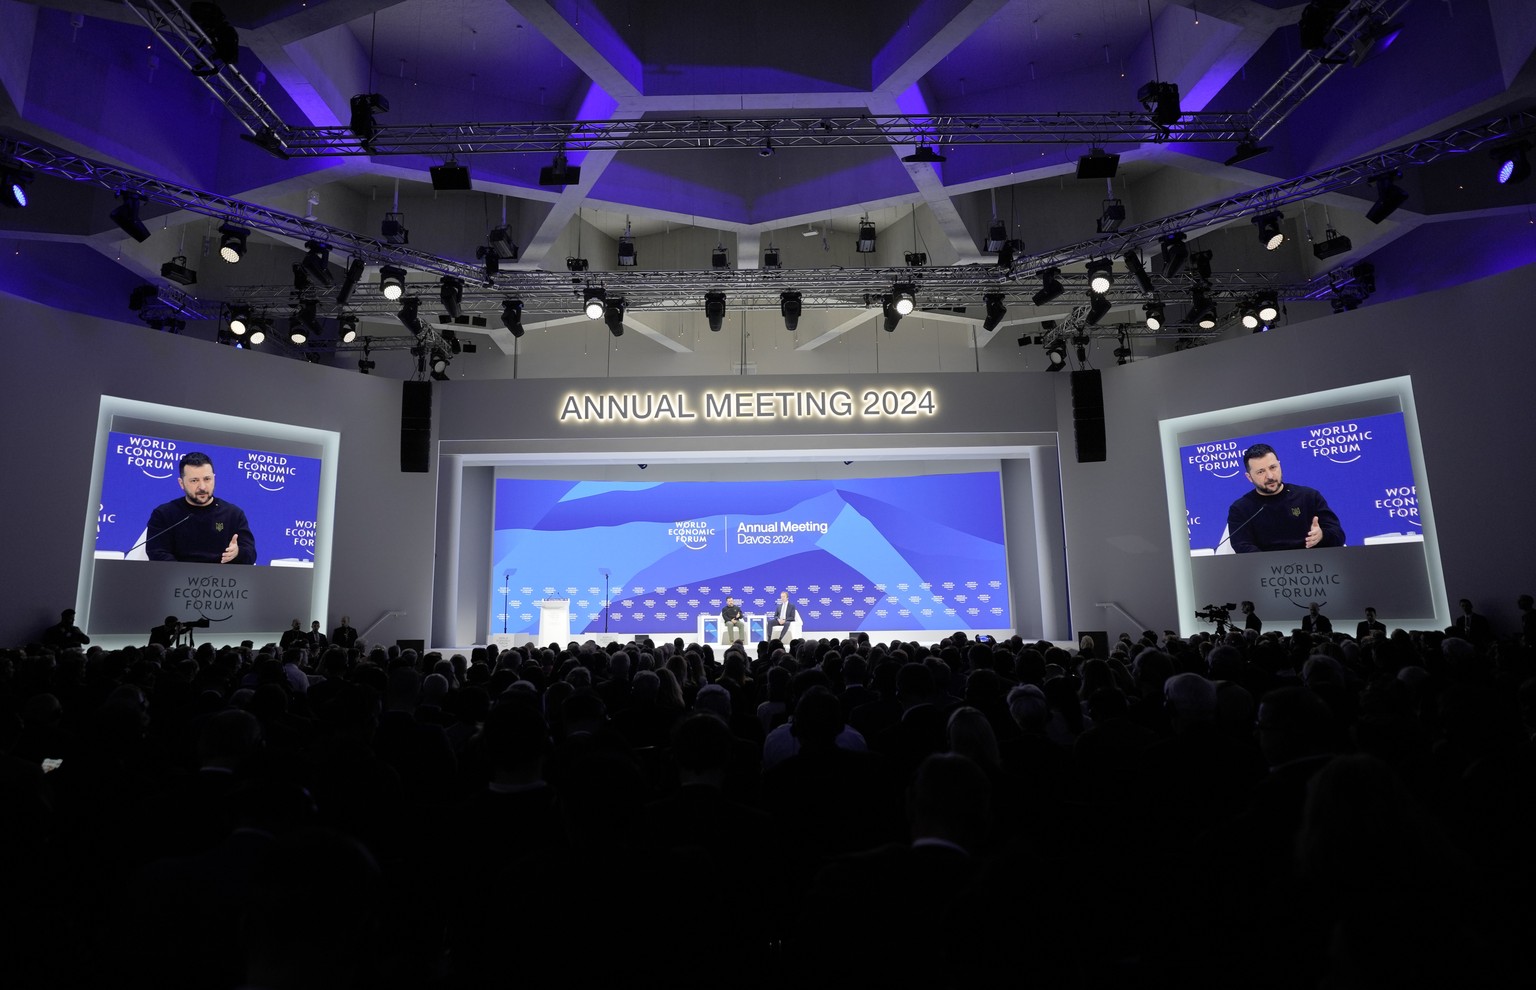 Ukrainian President Volodymyr Zelenskyy addresses attendees after his speech at the Annual Meeting of World Economic Forum in Davos, Switzerland, Tuesday, Jan. 16, 2024. The annual meeting of the Worl ...